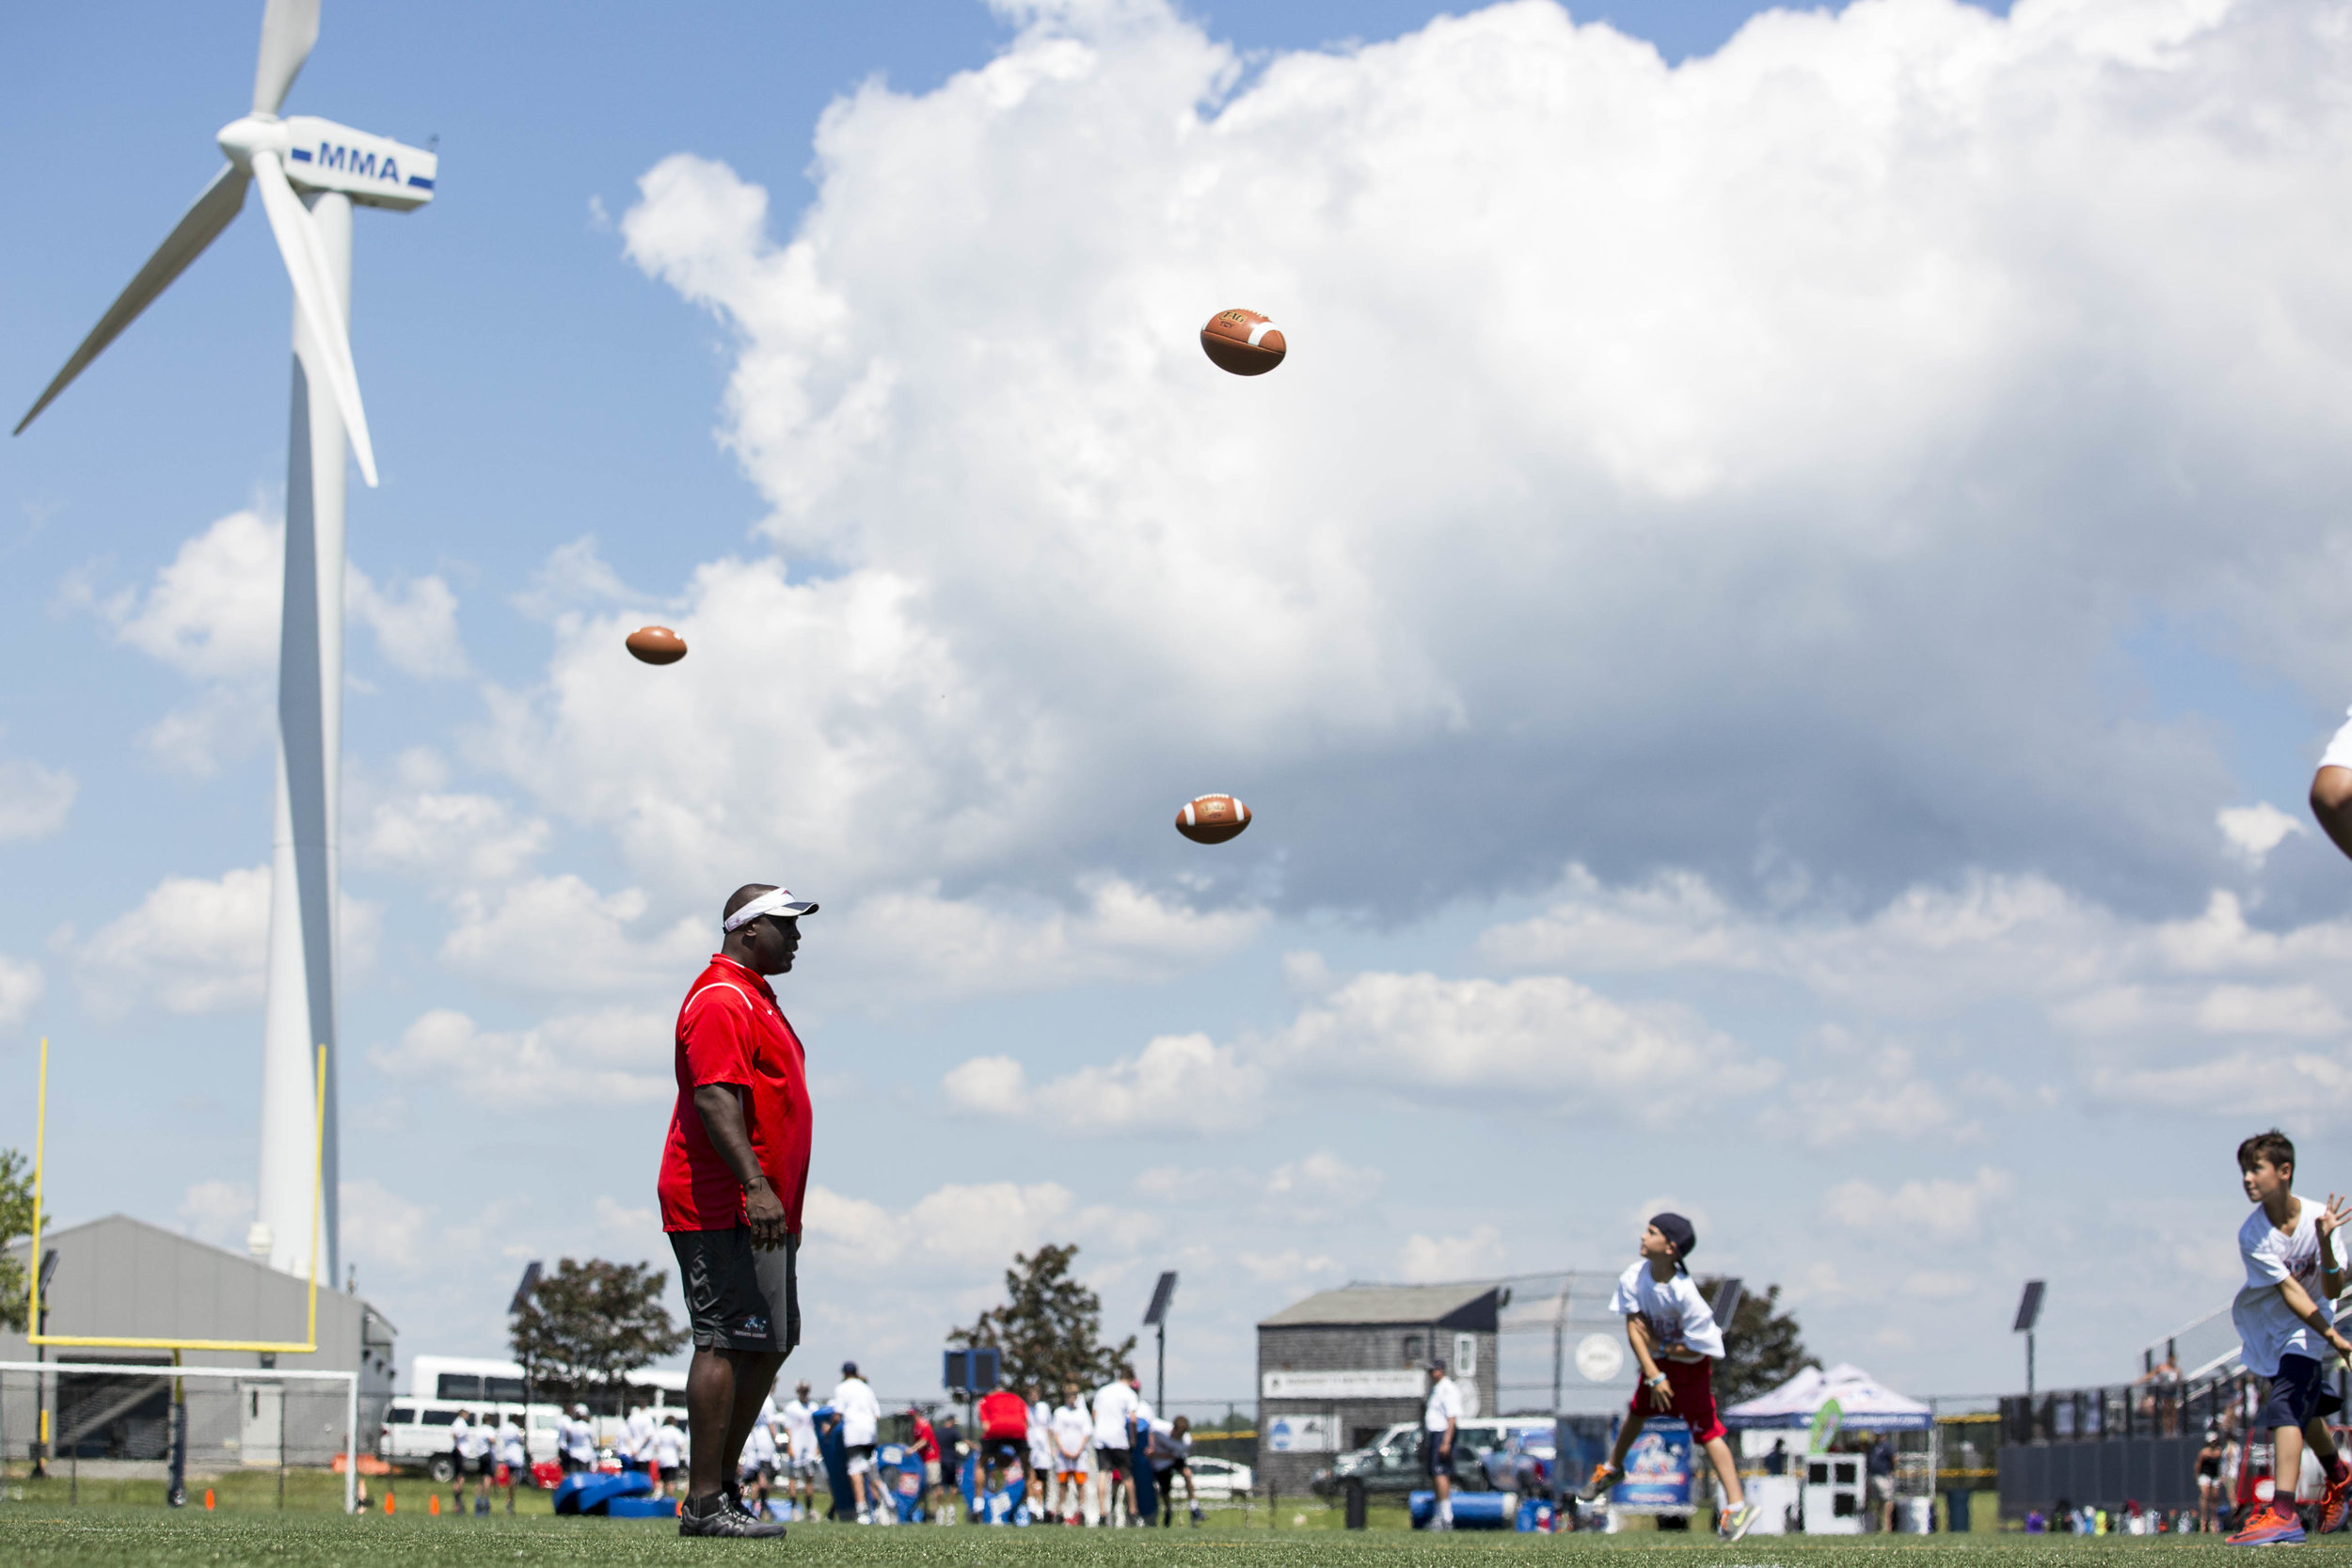  Balls fly over the head of former New England Patriots star Vernon Crawford during a passing drill a the Football for YOU clinic held at Massachusetts Maritime Academy on July 10, 2017. 